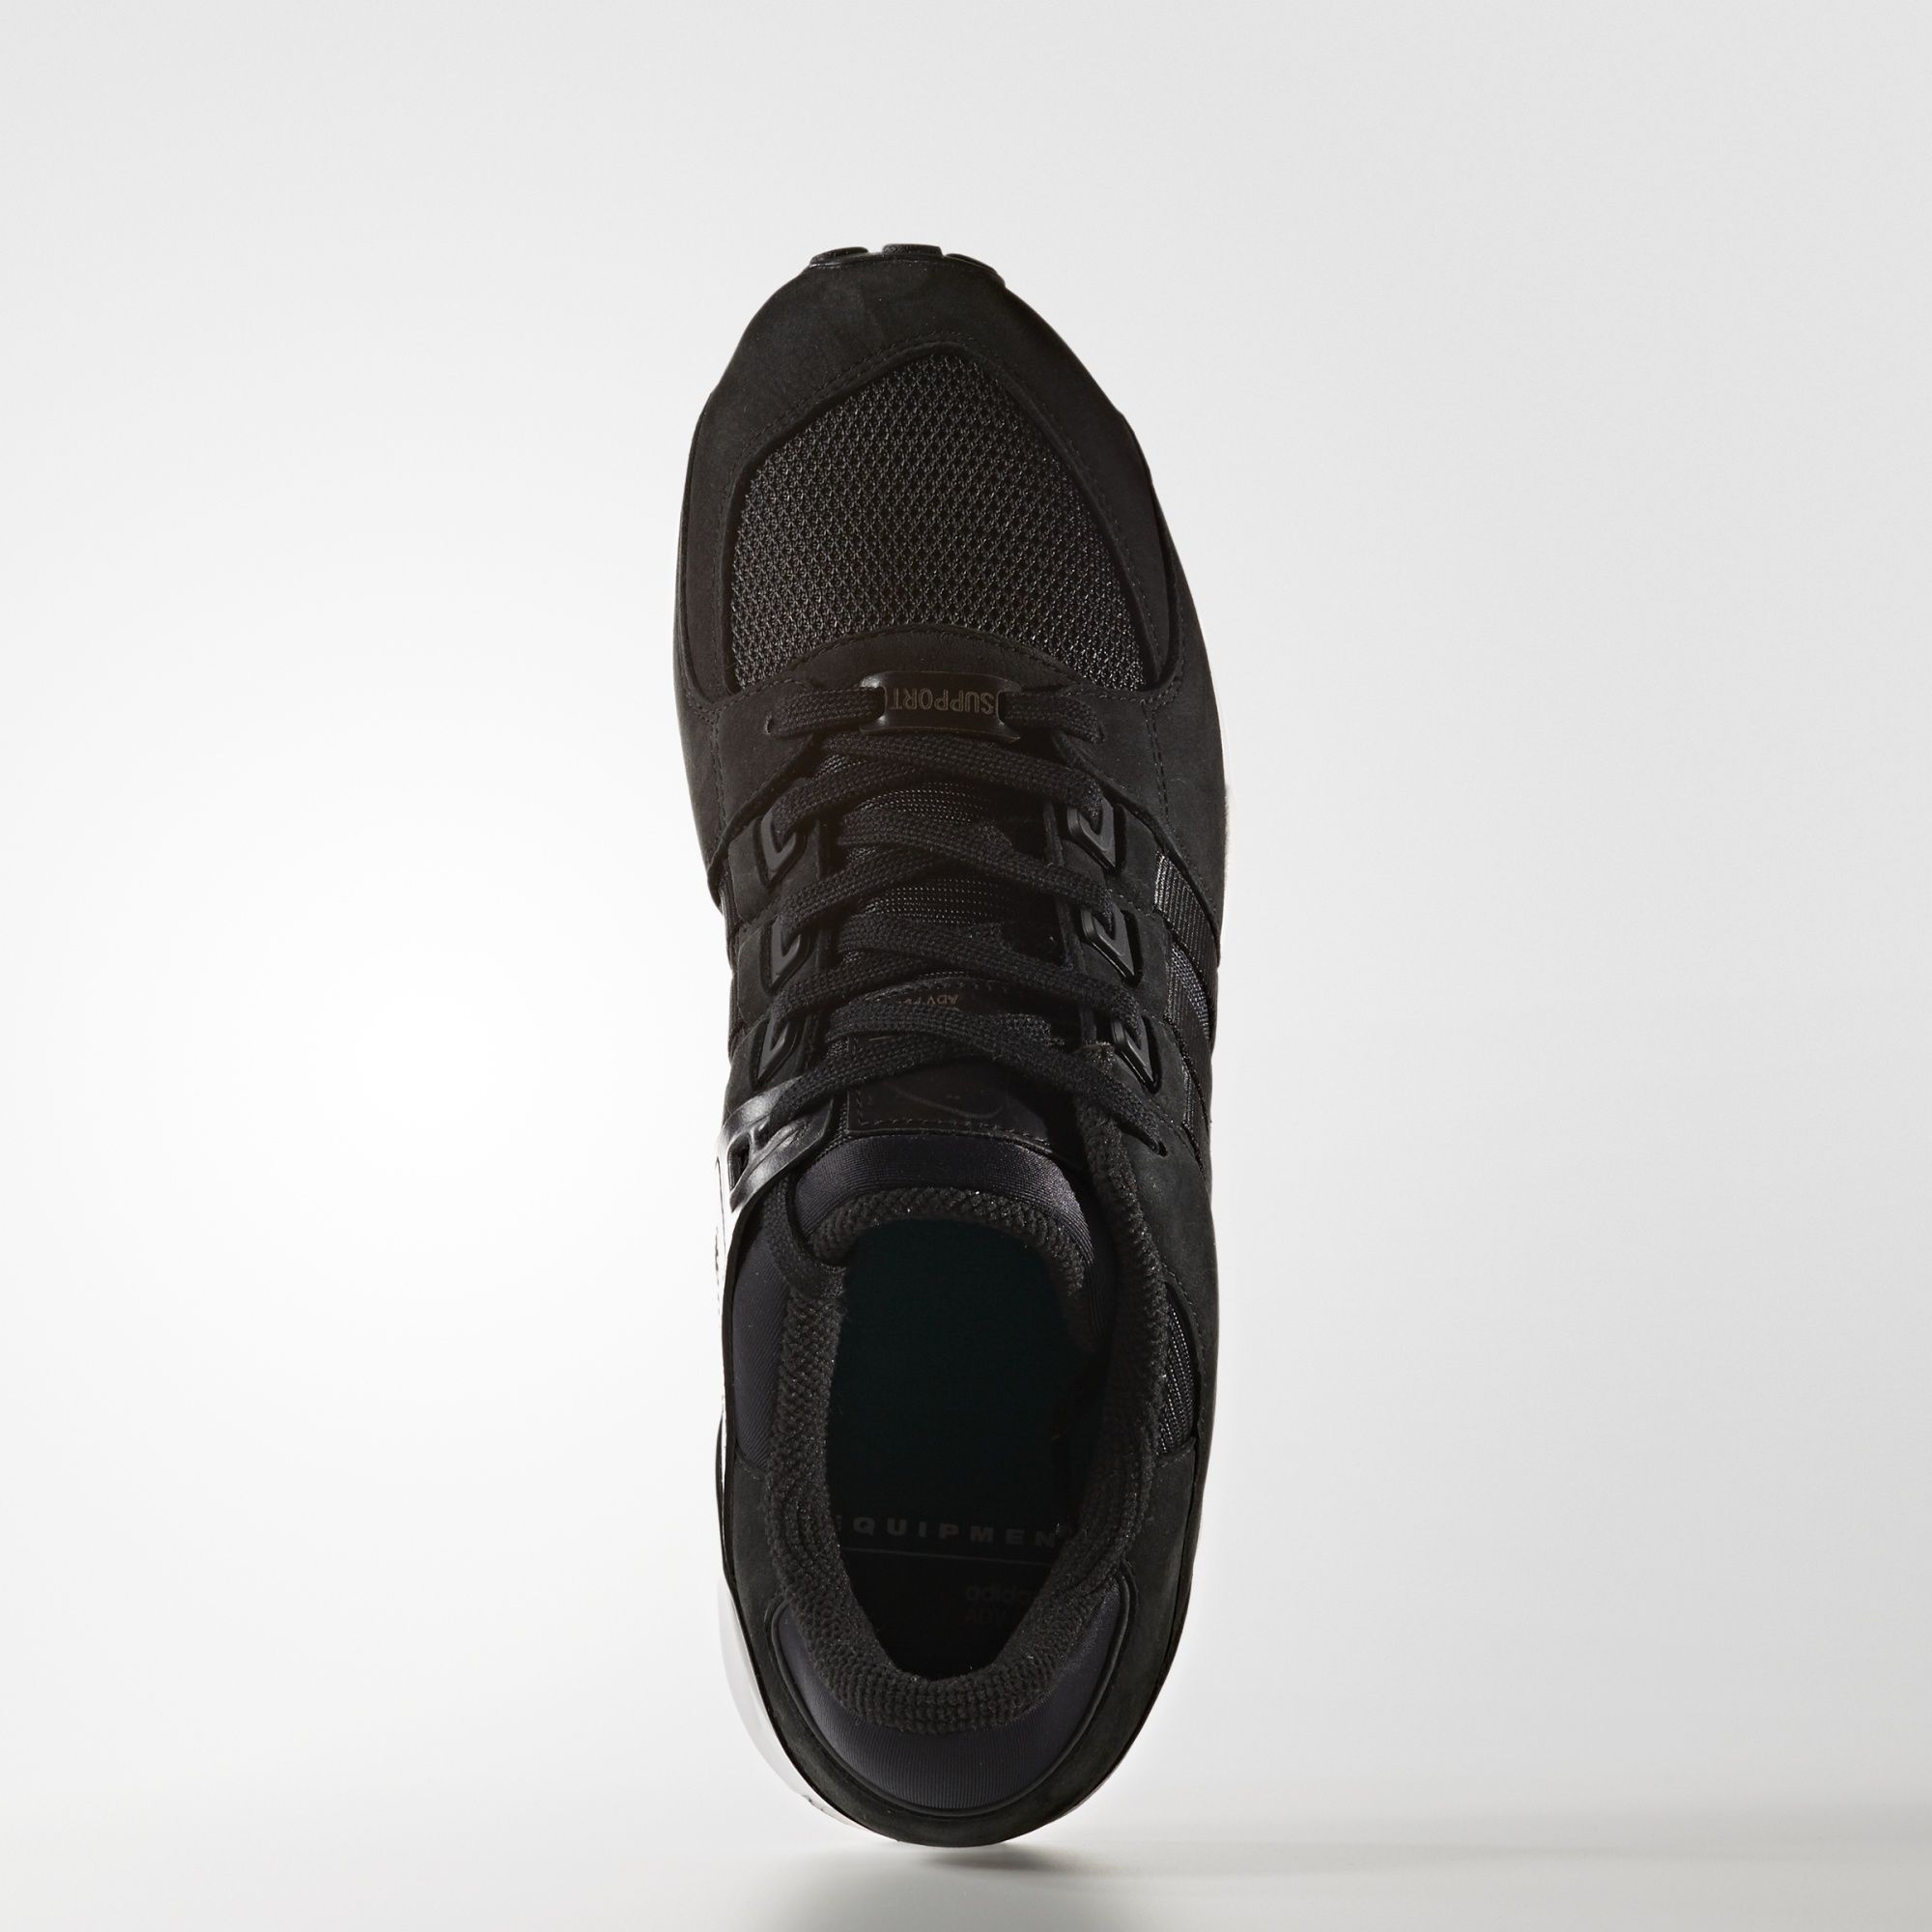 adidas-eqt-support-rf-milled-leather-pack-4